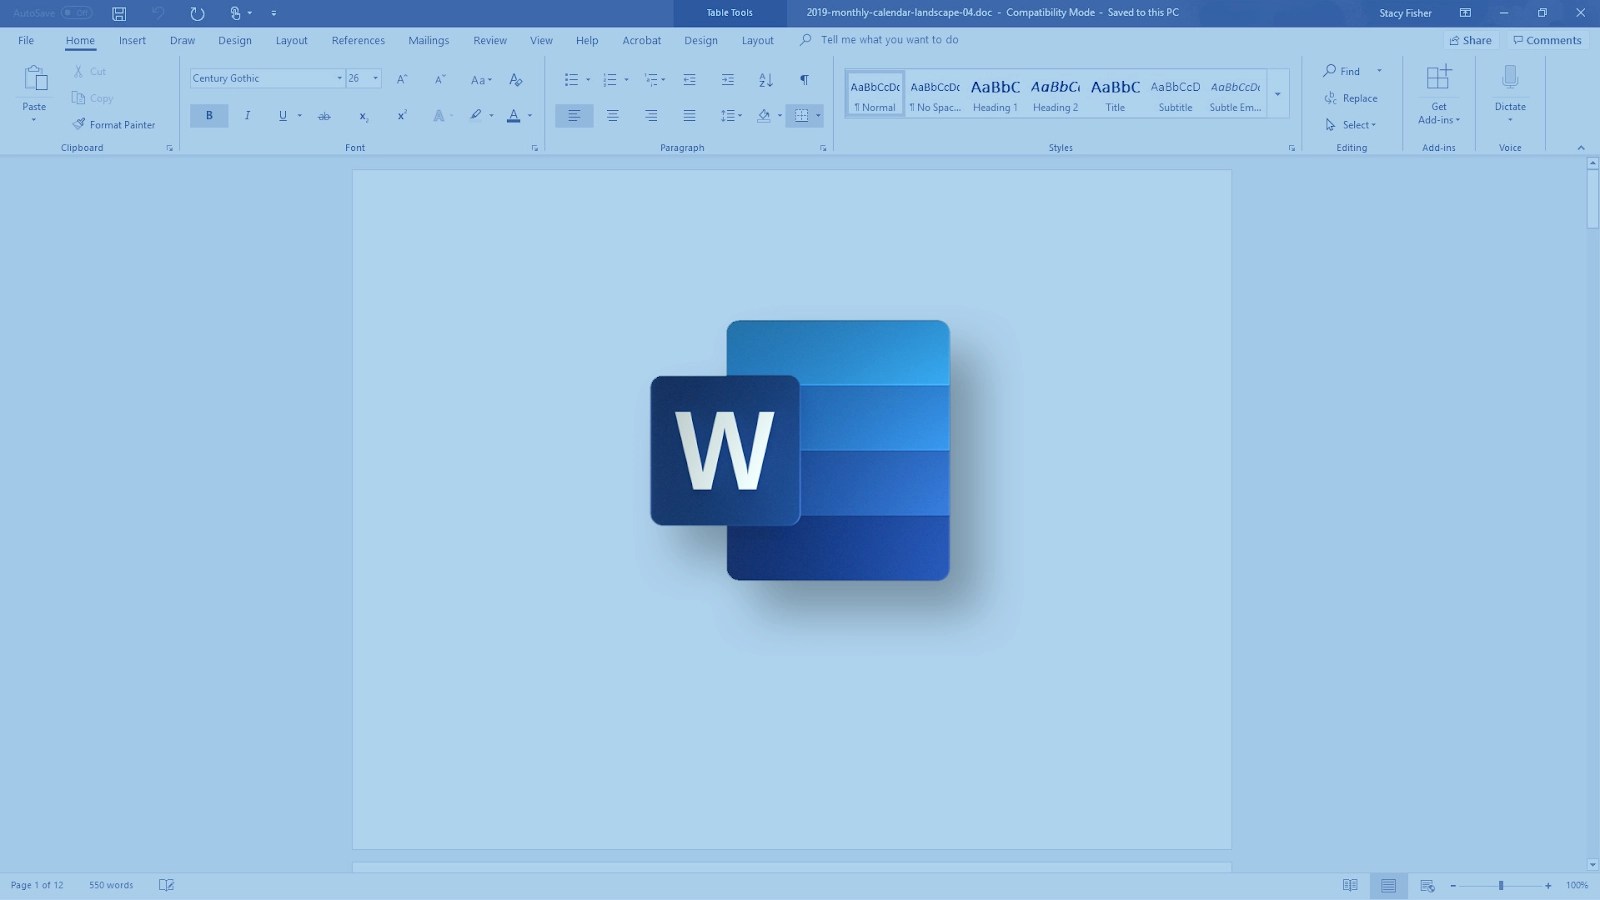 How to Find and Replace Text in Microsoft Word